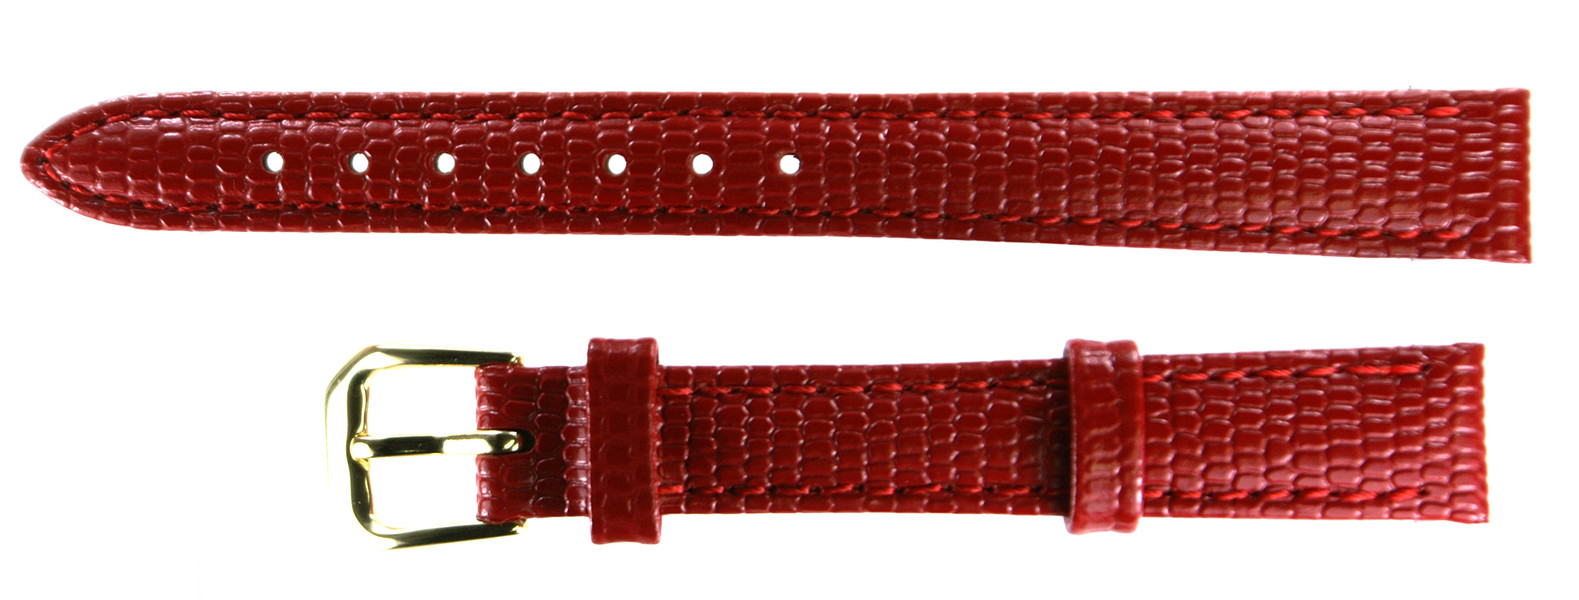 Lizard type clock band made in condor company 12mm (RED)